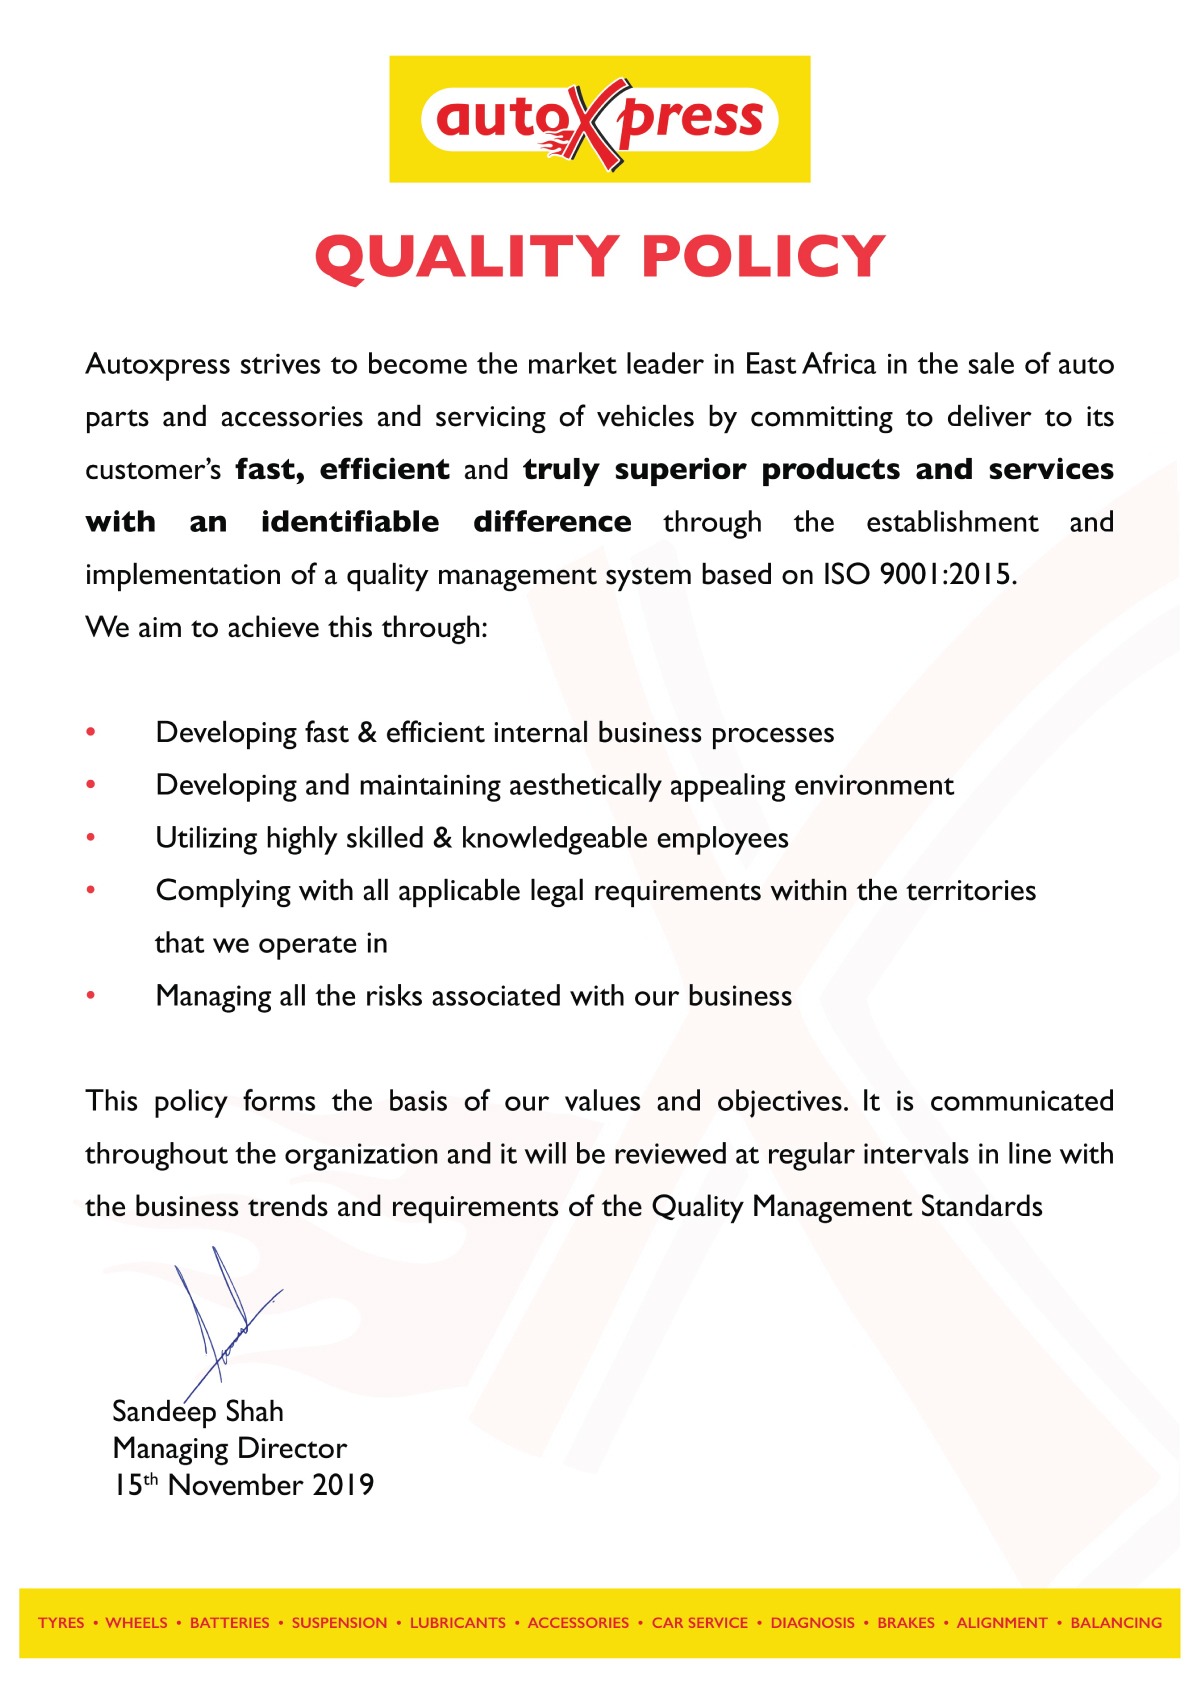 AX-Quality-Policy-2019